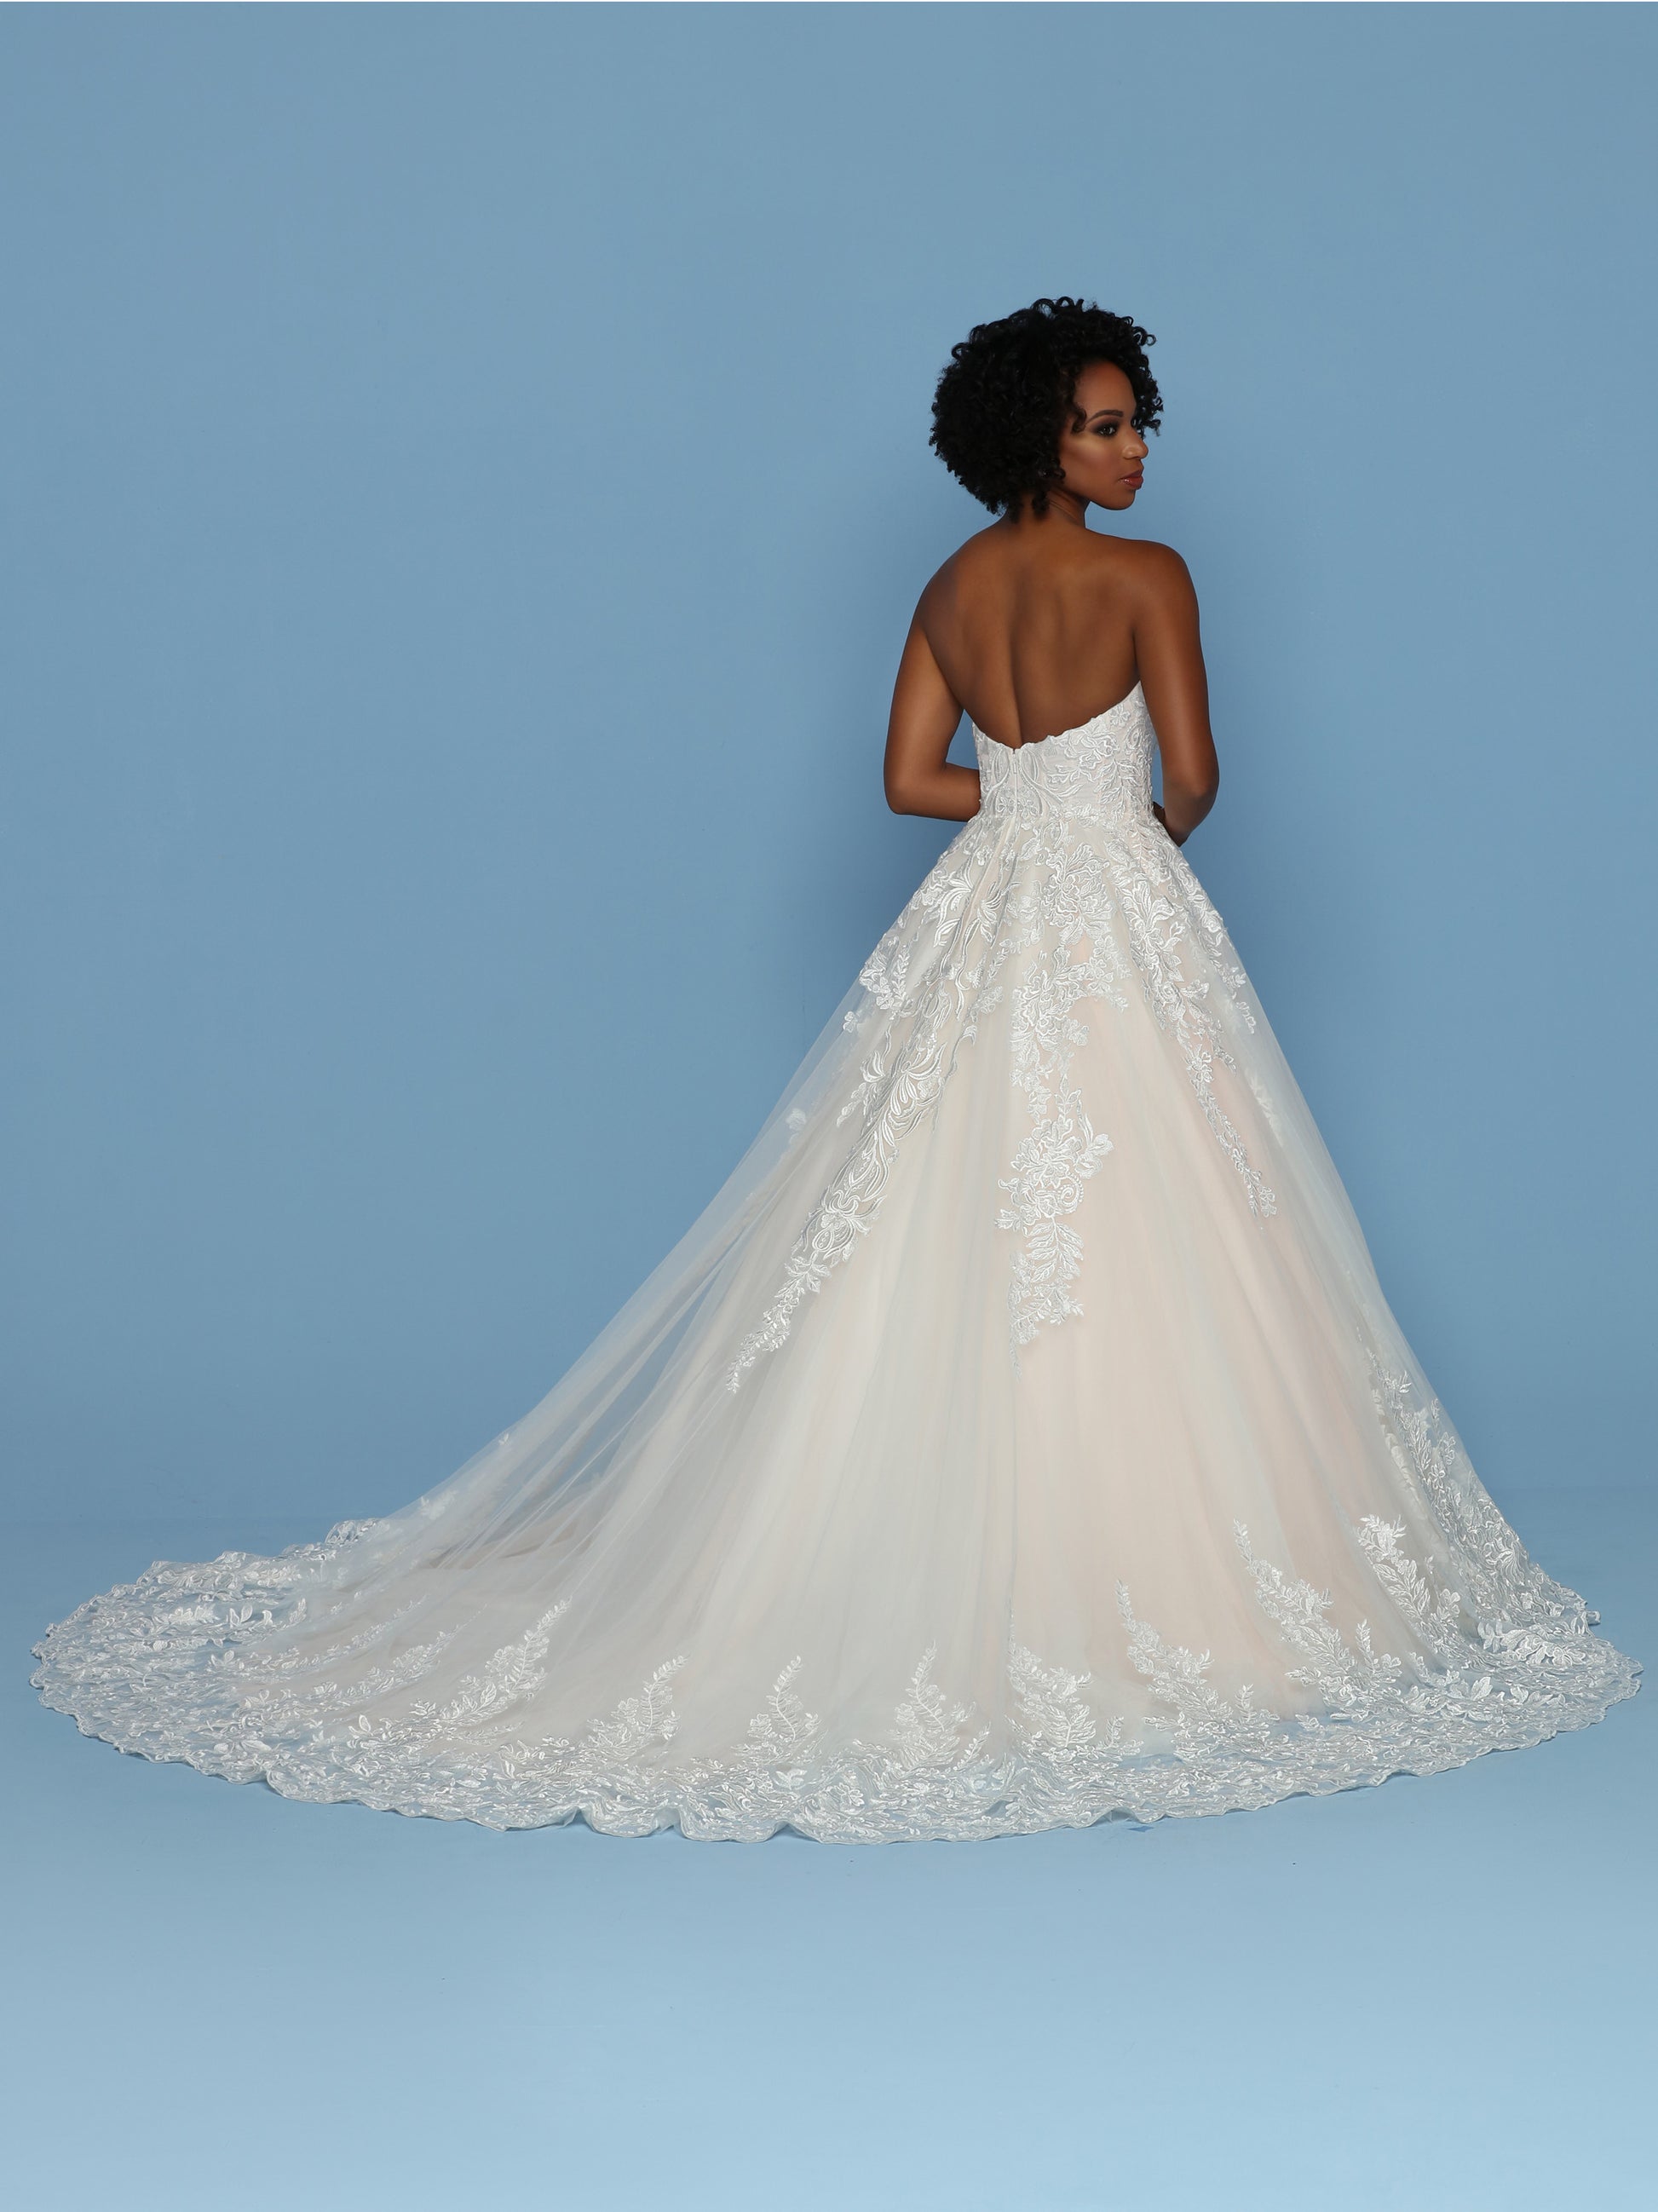 Davinci Bridal 50560 has a fitted strapless Sweetheart neckline with an embroidered lace bodice cascading into the tulle skirt. Full A Line Skirt Features a Lush Lace Edge around the hem and train.  Available for 1-2 Week Delivery!!!  Available Sizes: 2,4,6,8,10,12,14,16,18,20  Available Colors: Ivory/Blush, Ivory/Ivory